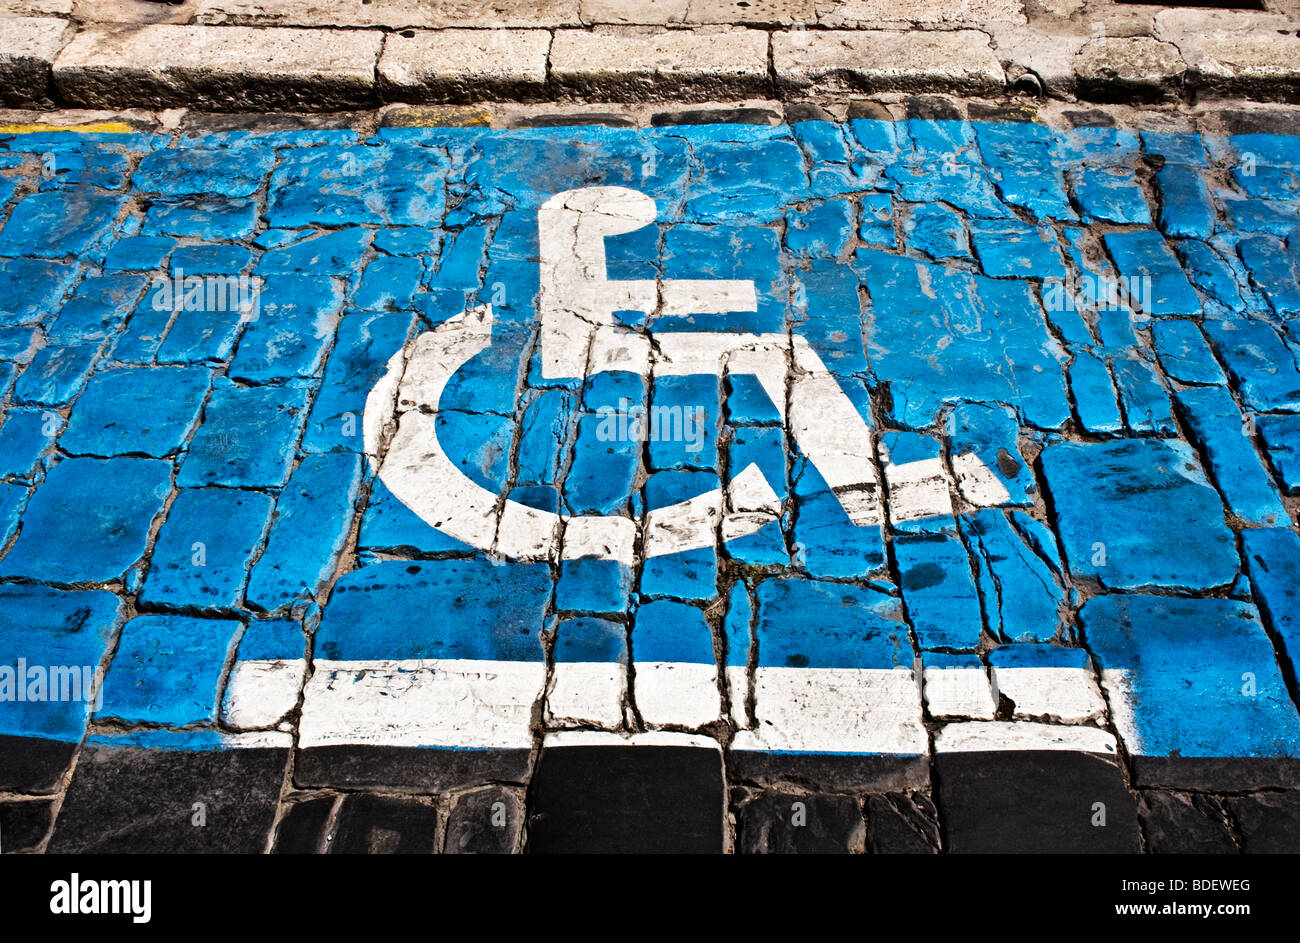 Disabled parking bay on cobbled street. Stock Photo